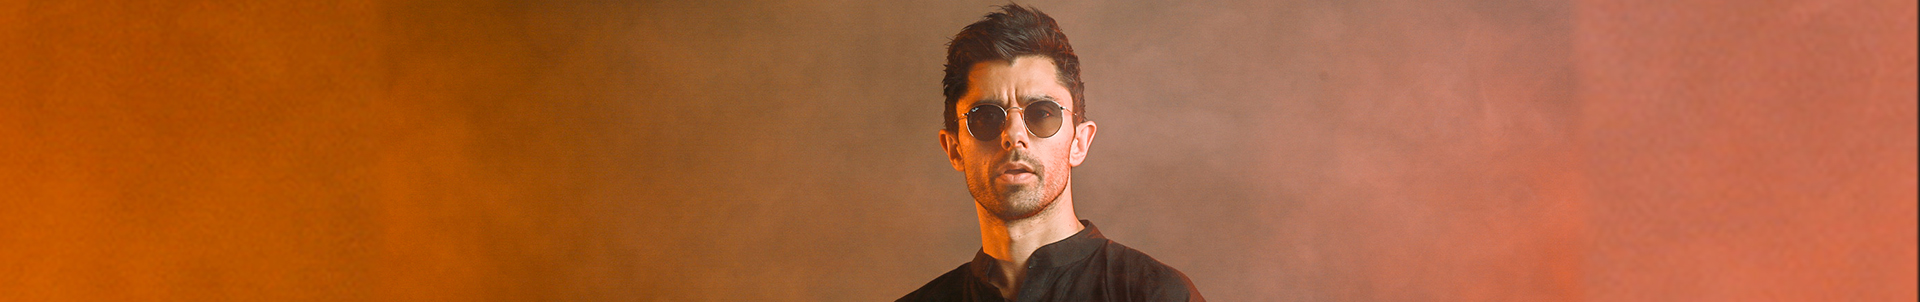 VOTE NOW: What is your favorite track by KSHMR?